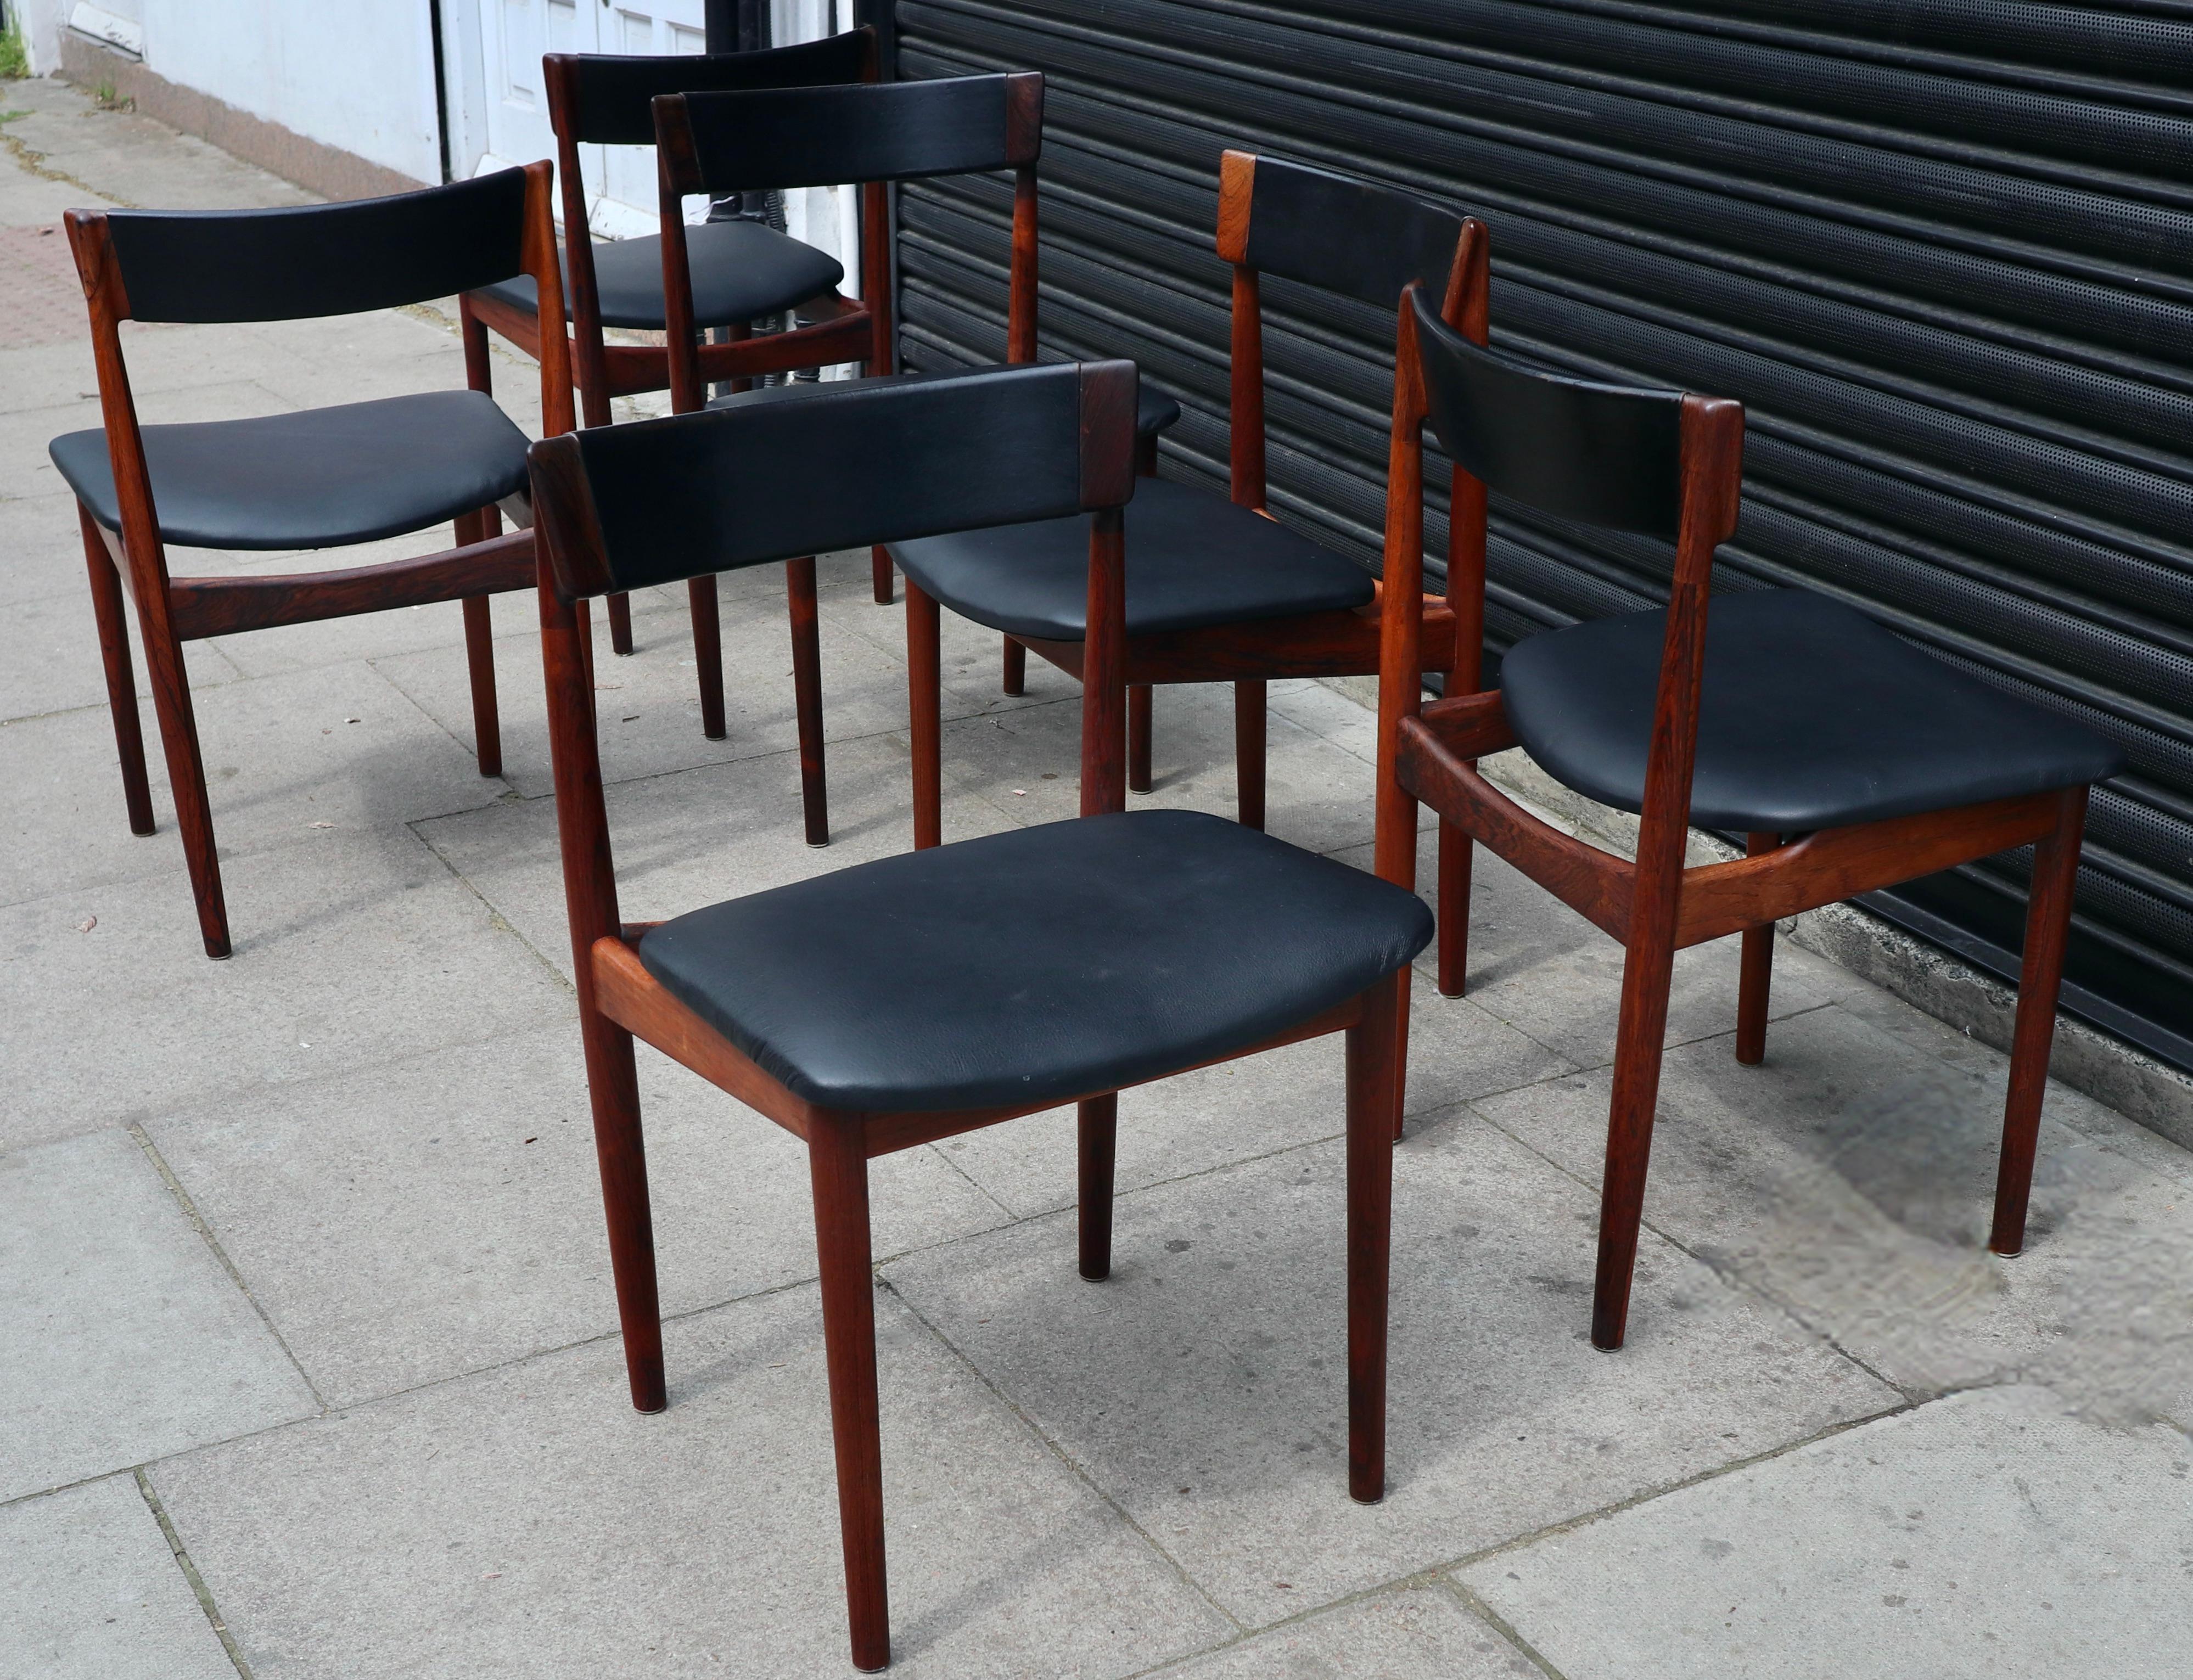 A vintage 1960s rare set of six Rosewood and leather dining chairs model 39 designed by Henry Rosengren Hansen. Produced by Brande møbelfabrik in Denmark.